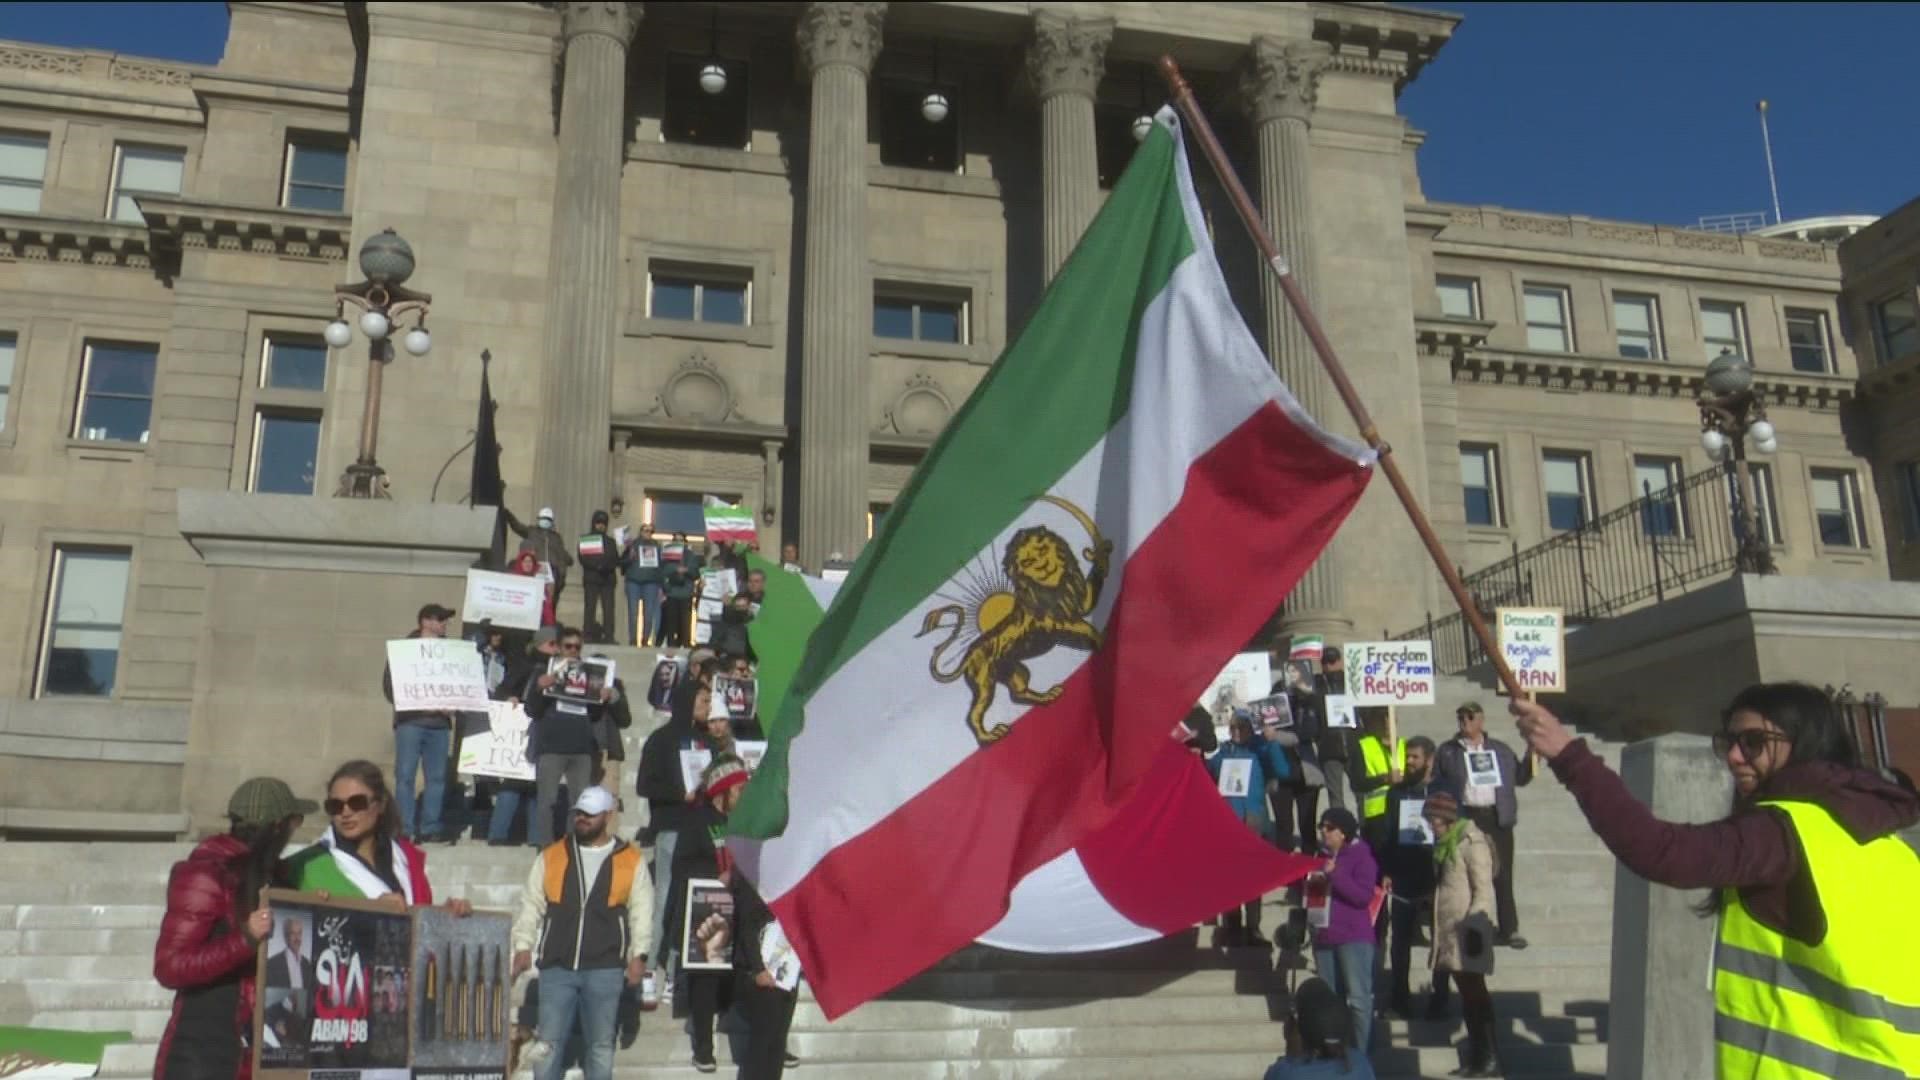 Protestors in Boise aimed to spread awareness of the persecution of women in Iran.